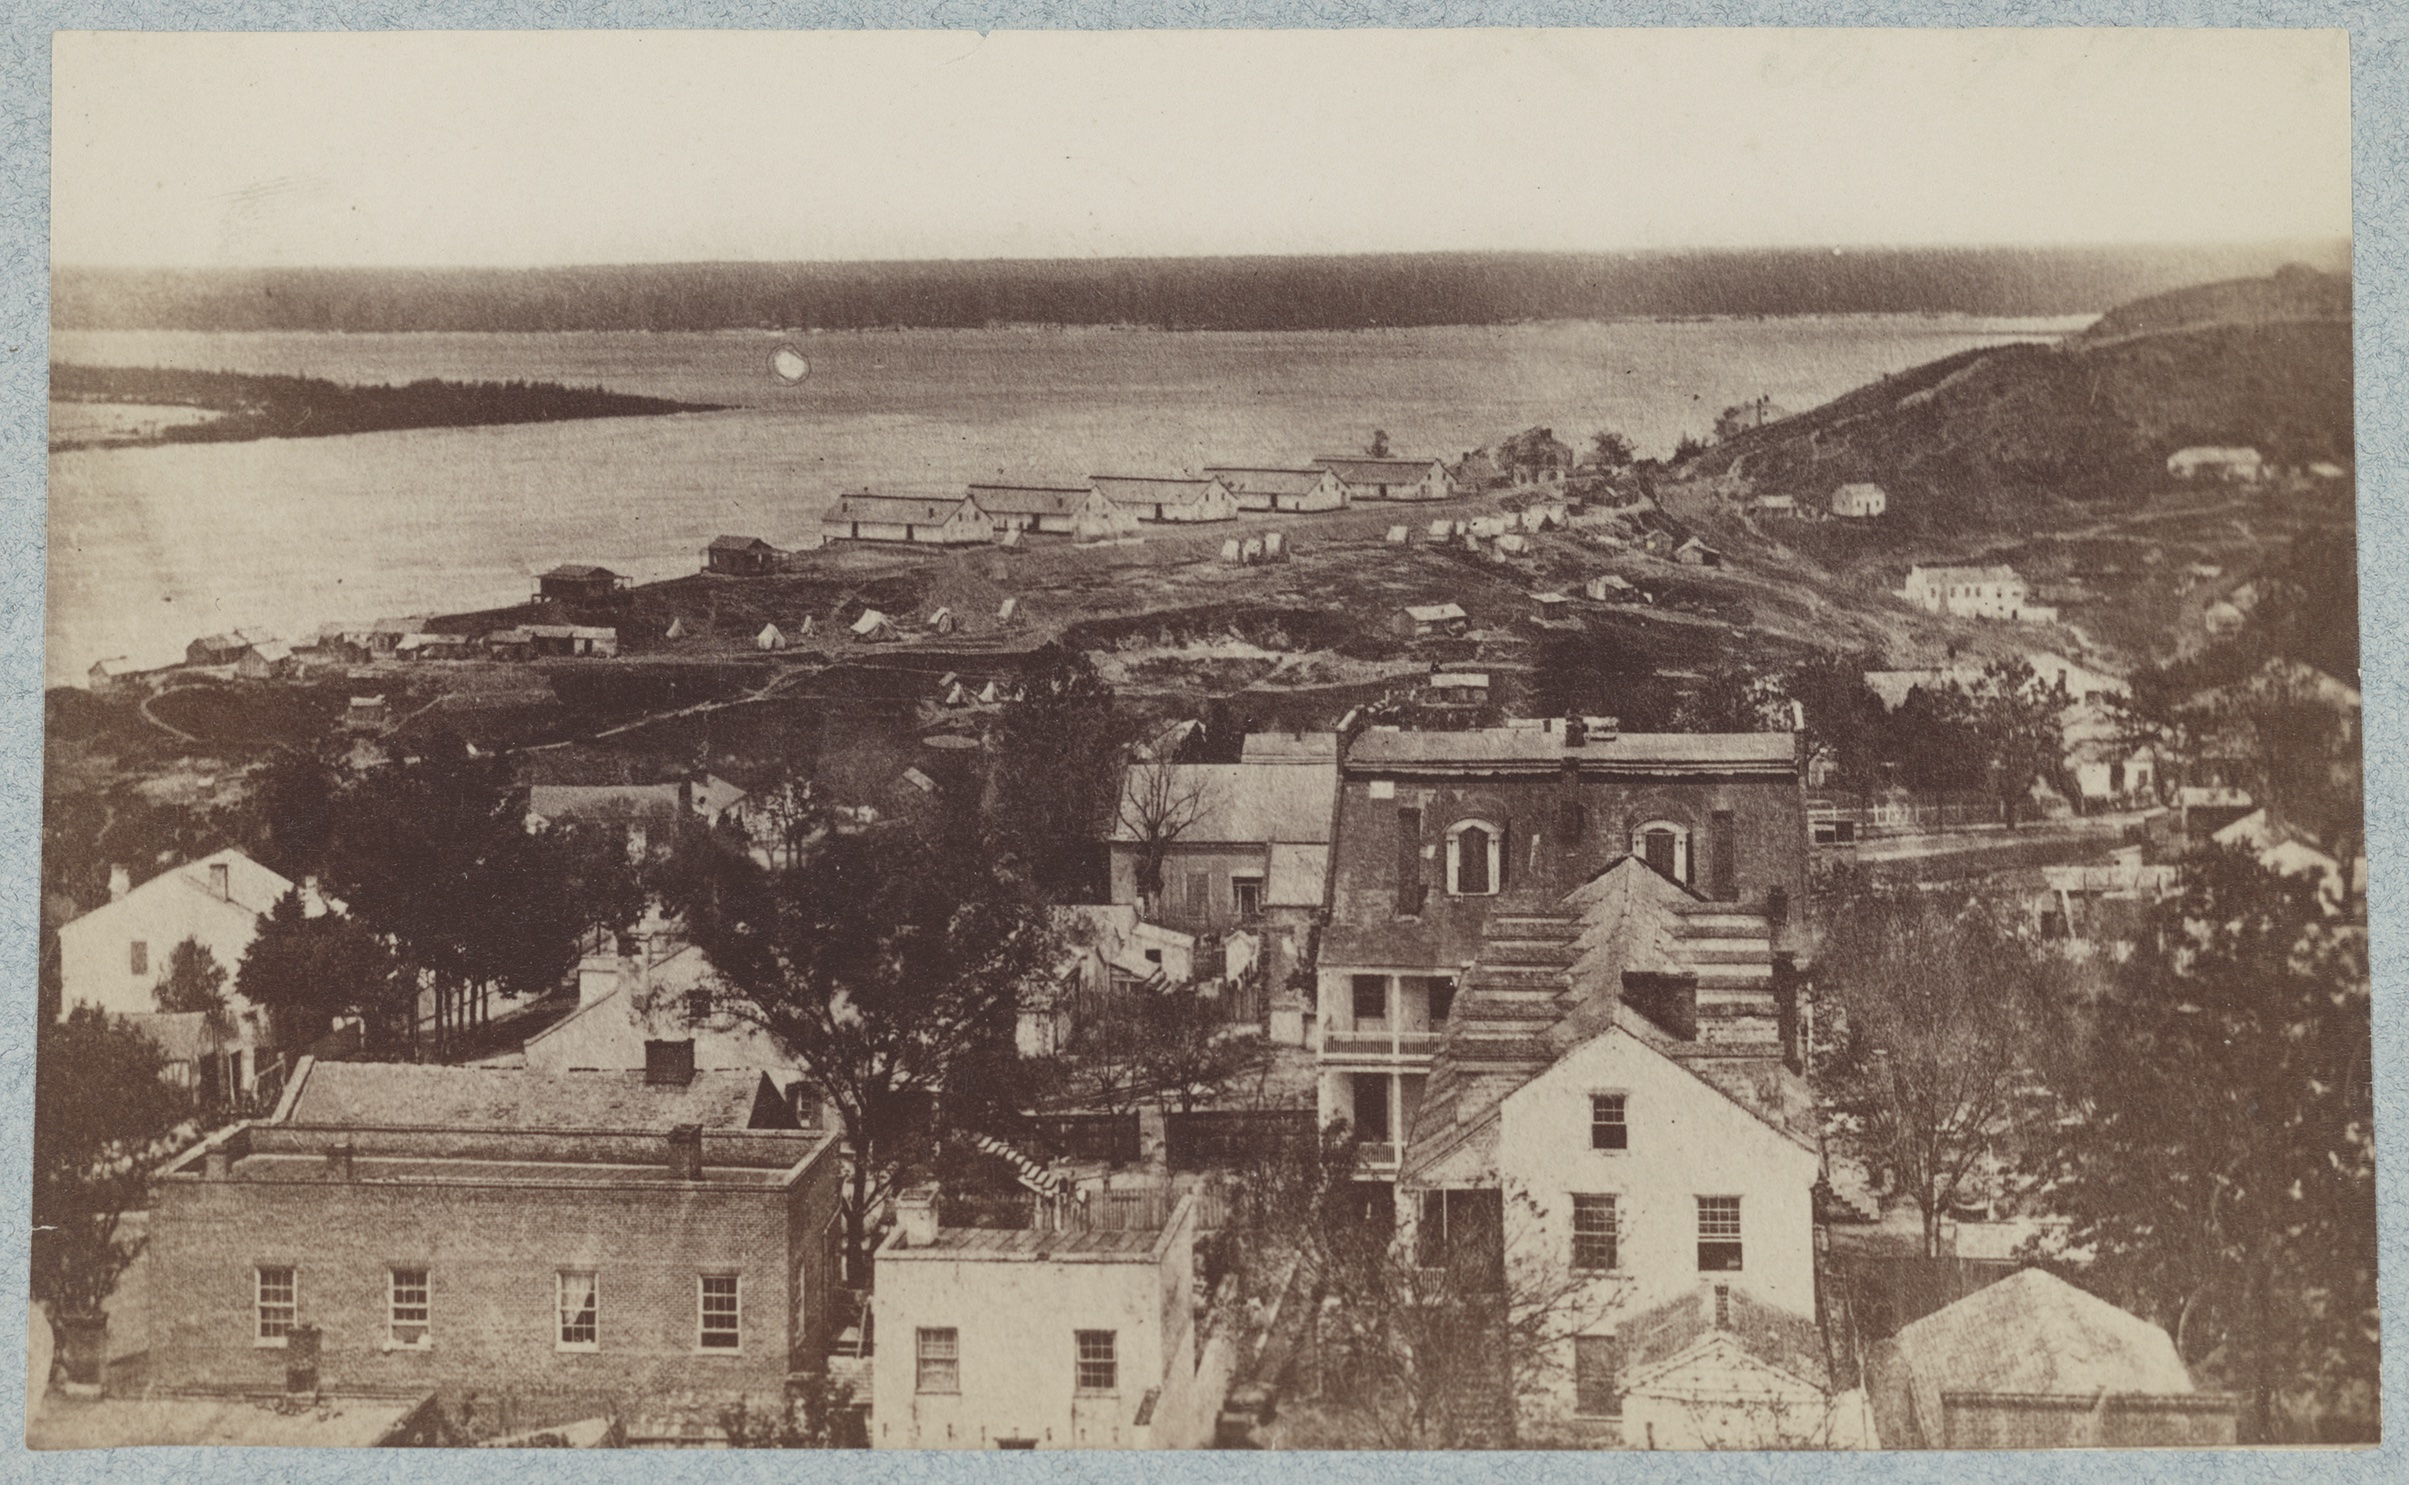 This image of Vicksburg was taken after Maj. Gen. Ulysses S. Grant captured it on July 4, 1863. Federal barracks and tents can be seen along the riverbank. (Library of Congress)